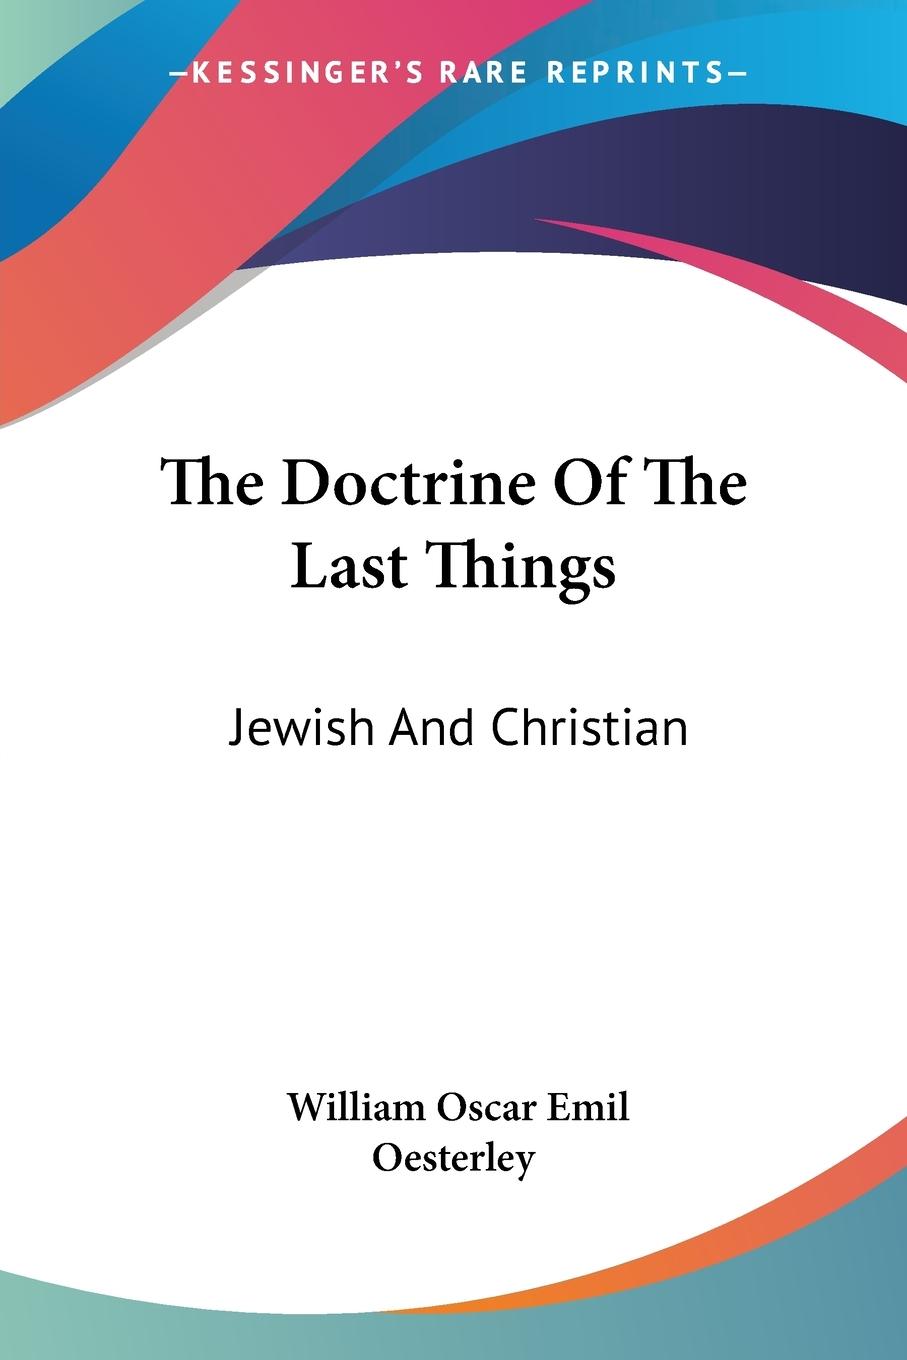 The Doctrine Of The Last Things - Oesterley, William Oscar Emil